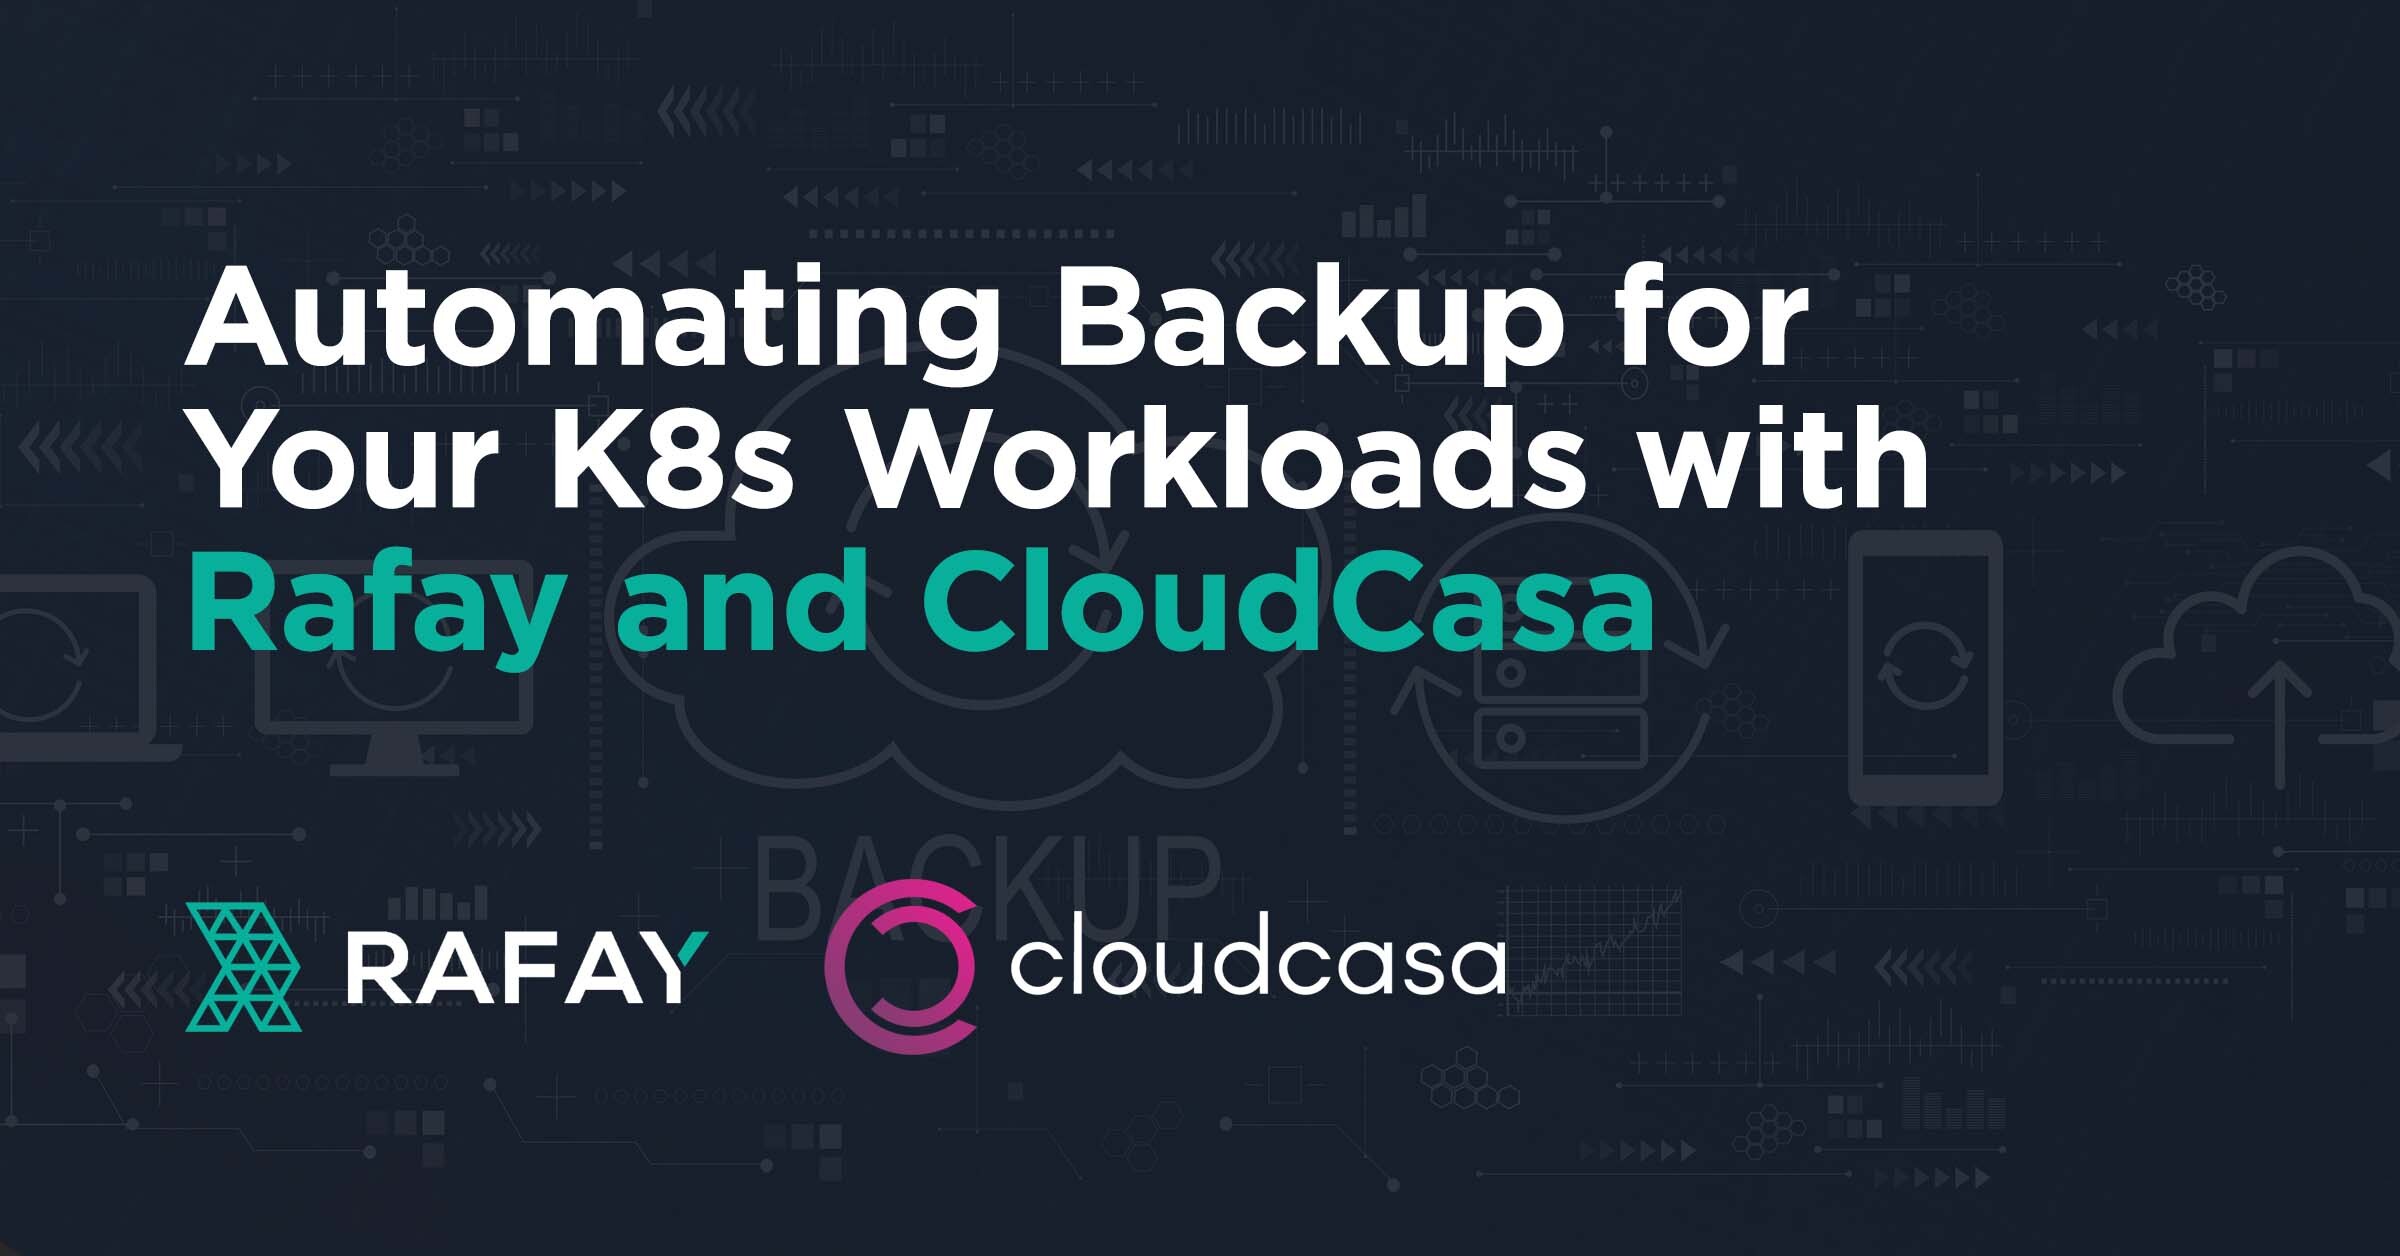 Image for Automating Backup for Your K8s Workloads with Rafay and CloudCasa